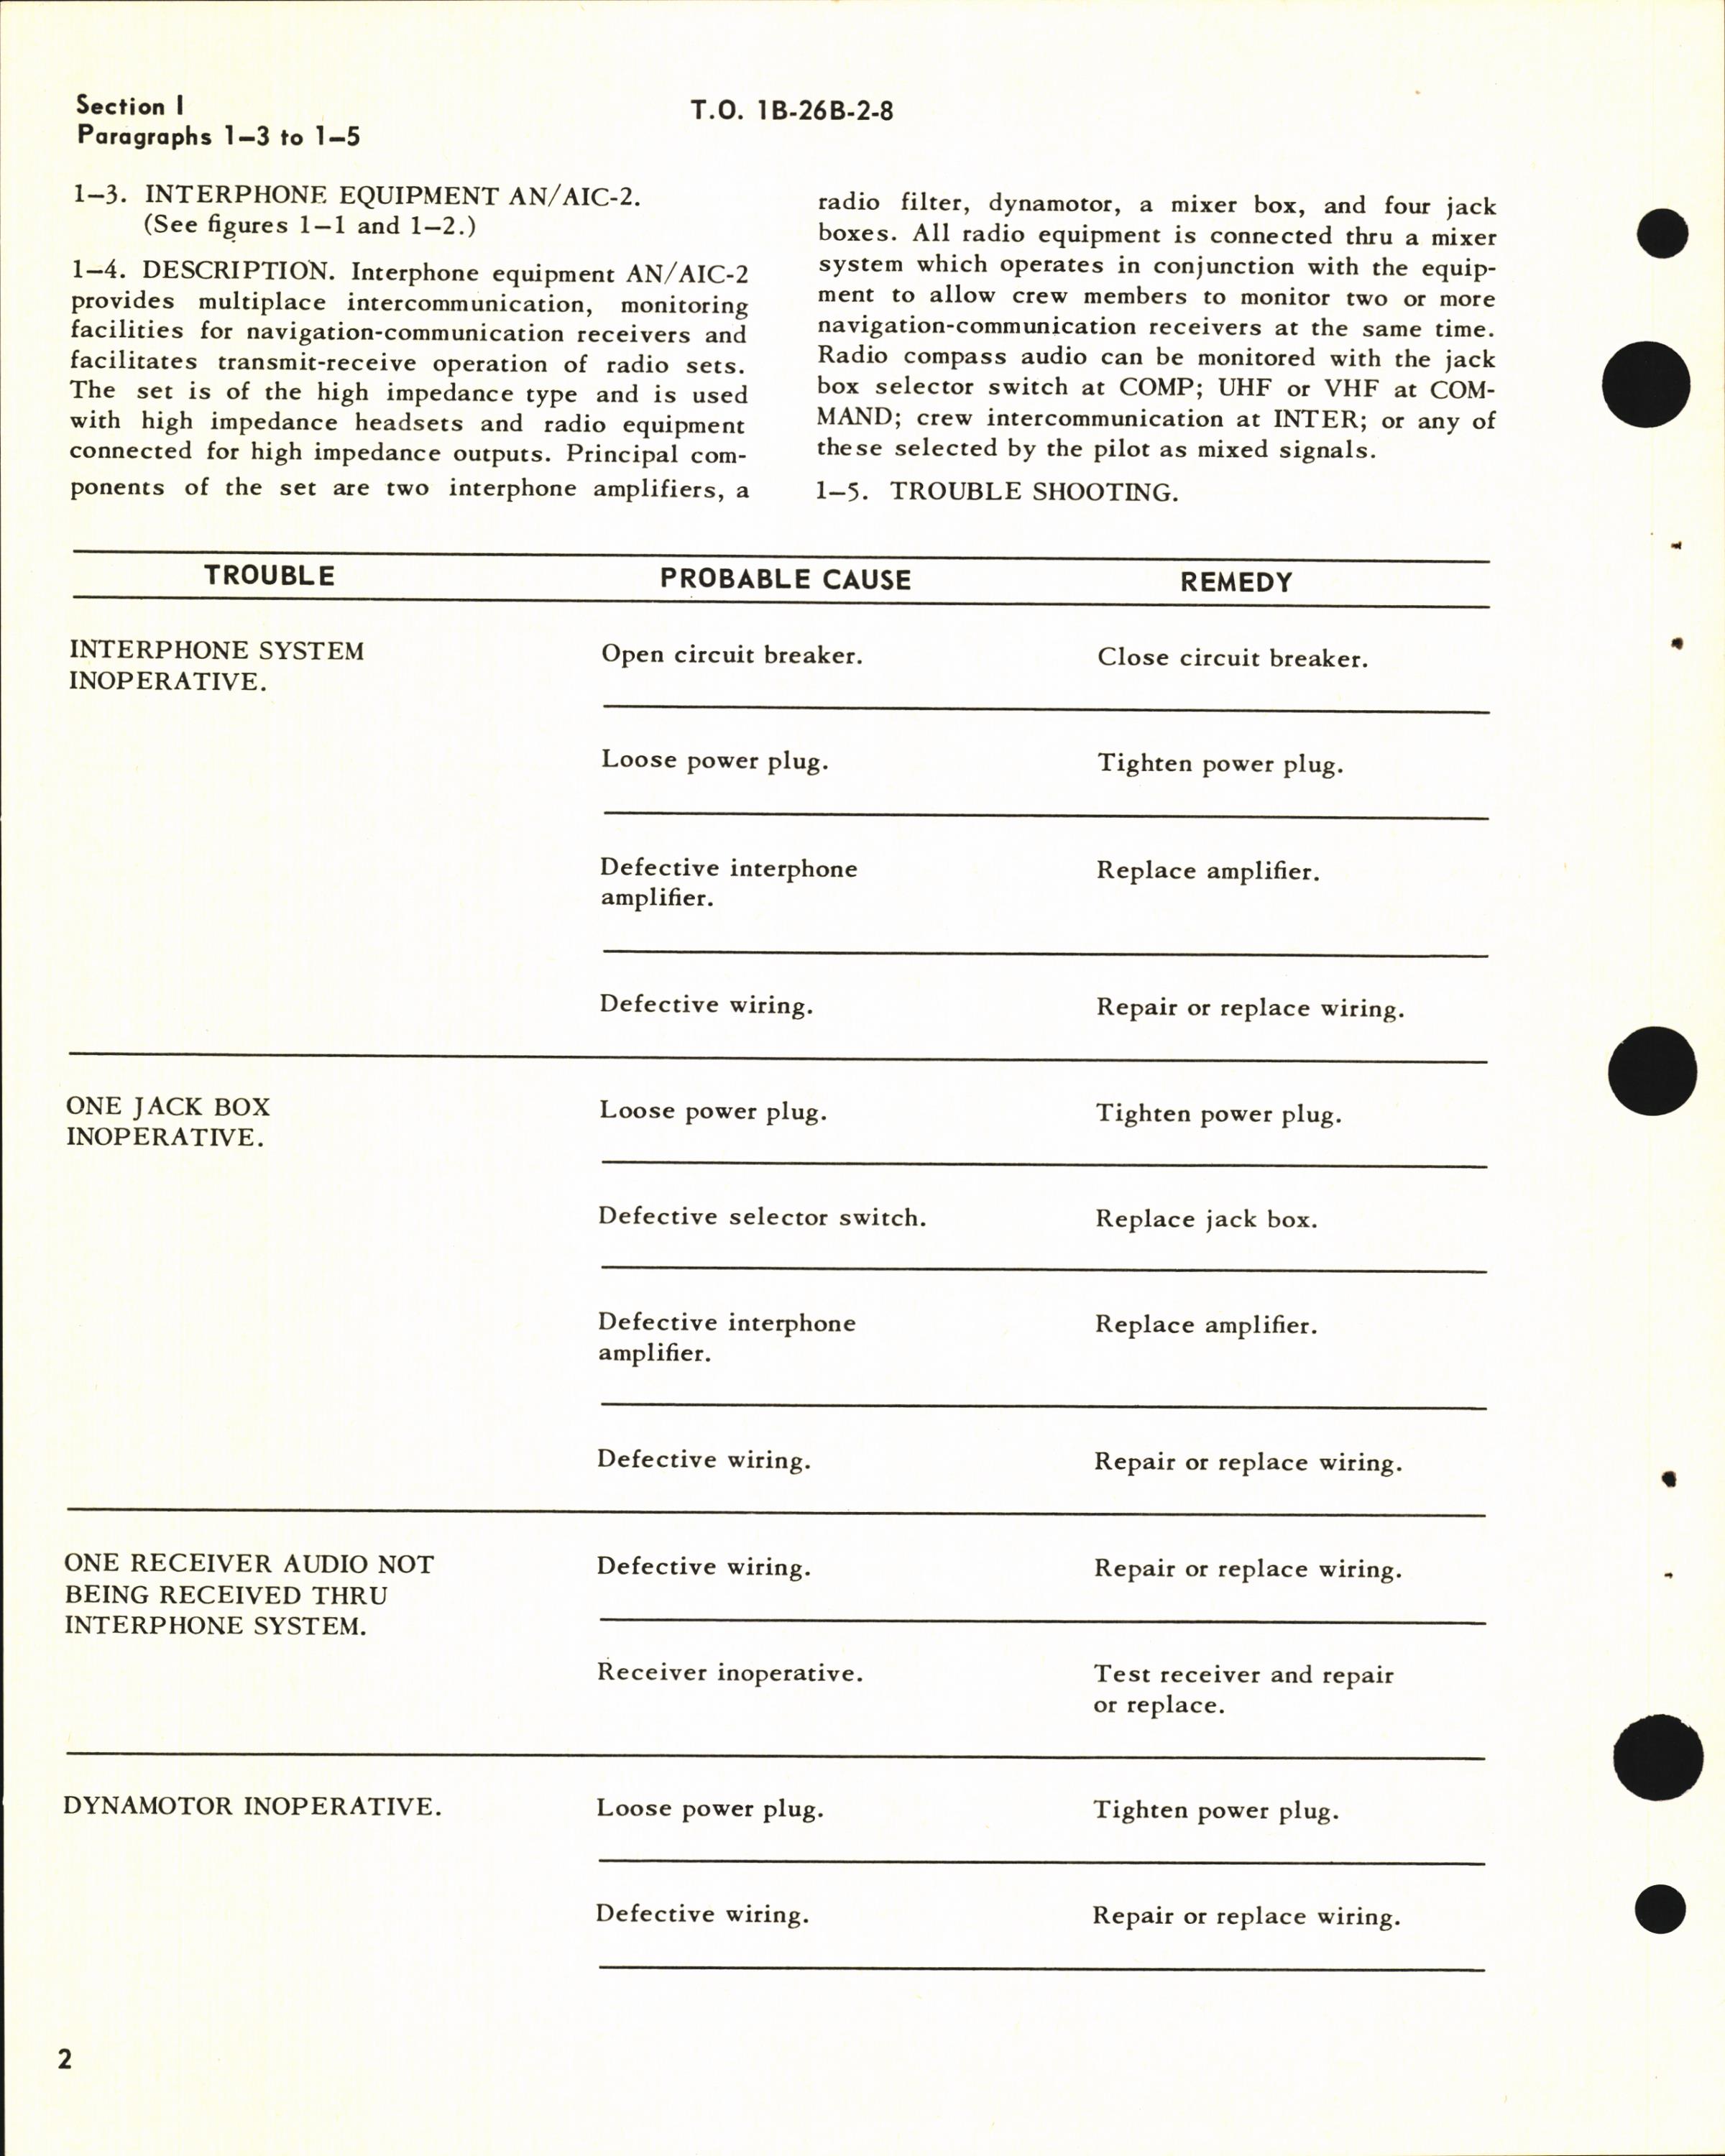 Sample page 8 from AirCorps Library document: Maintenance Instructions for B-26B, B-26C, TB-26B, TB-26C, and JD-1 - Communication, Navigation, & Identification Equip